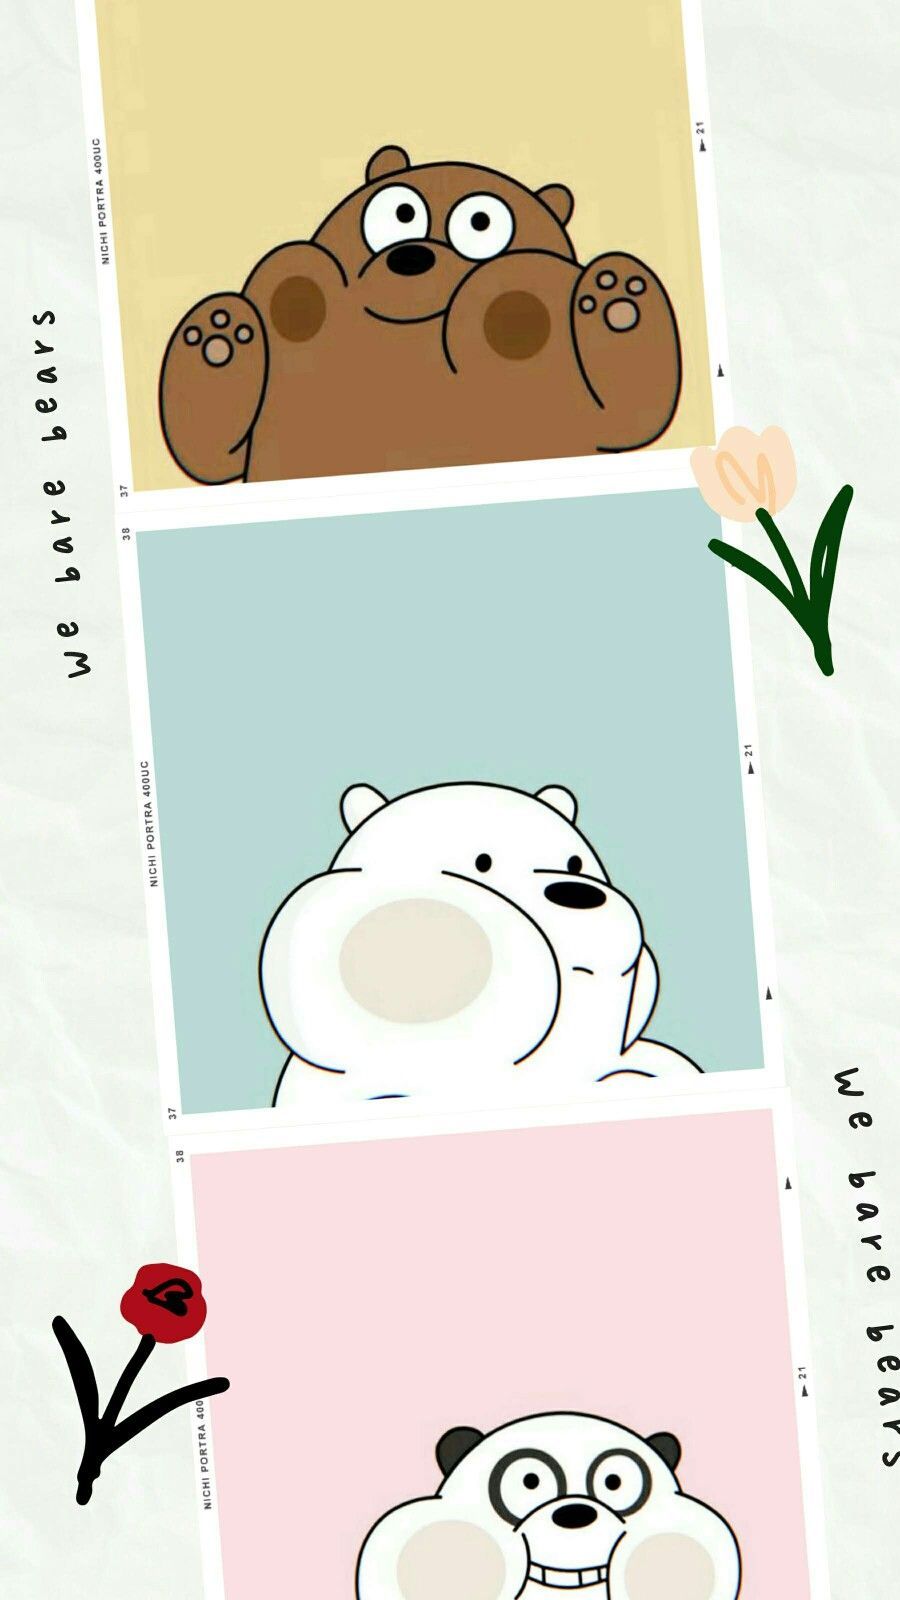 A poster with three different pictures of bears - We Bare Bears